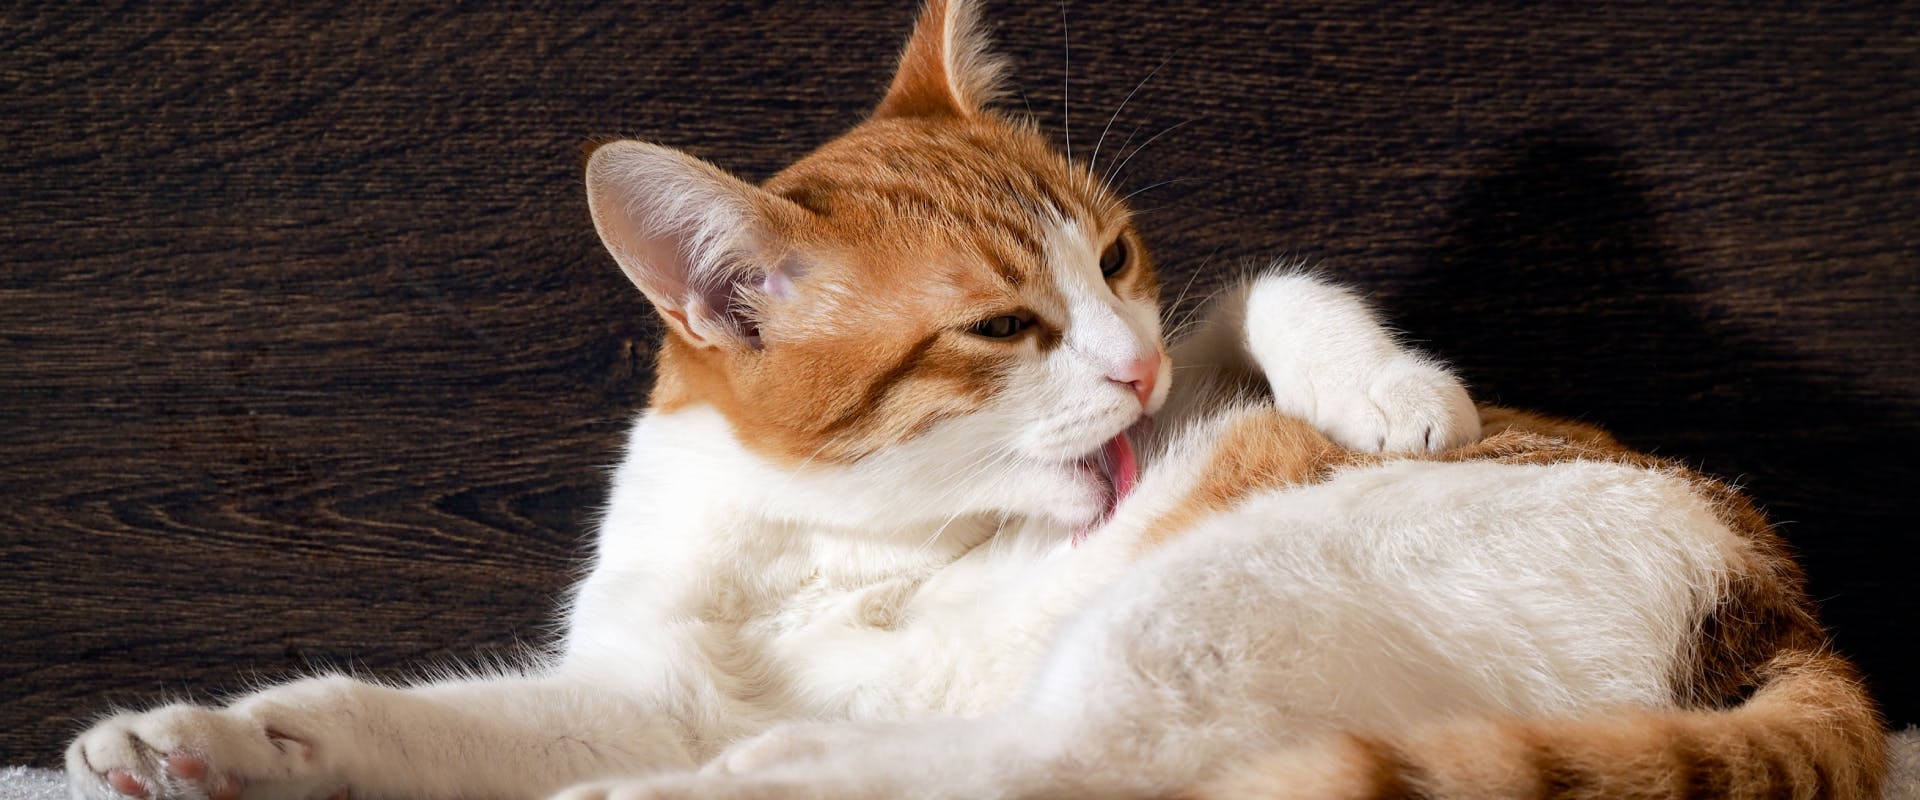 Why Do Cats Lick Themselves? | Trustedhousesitters.Com